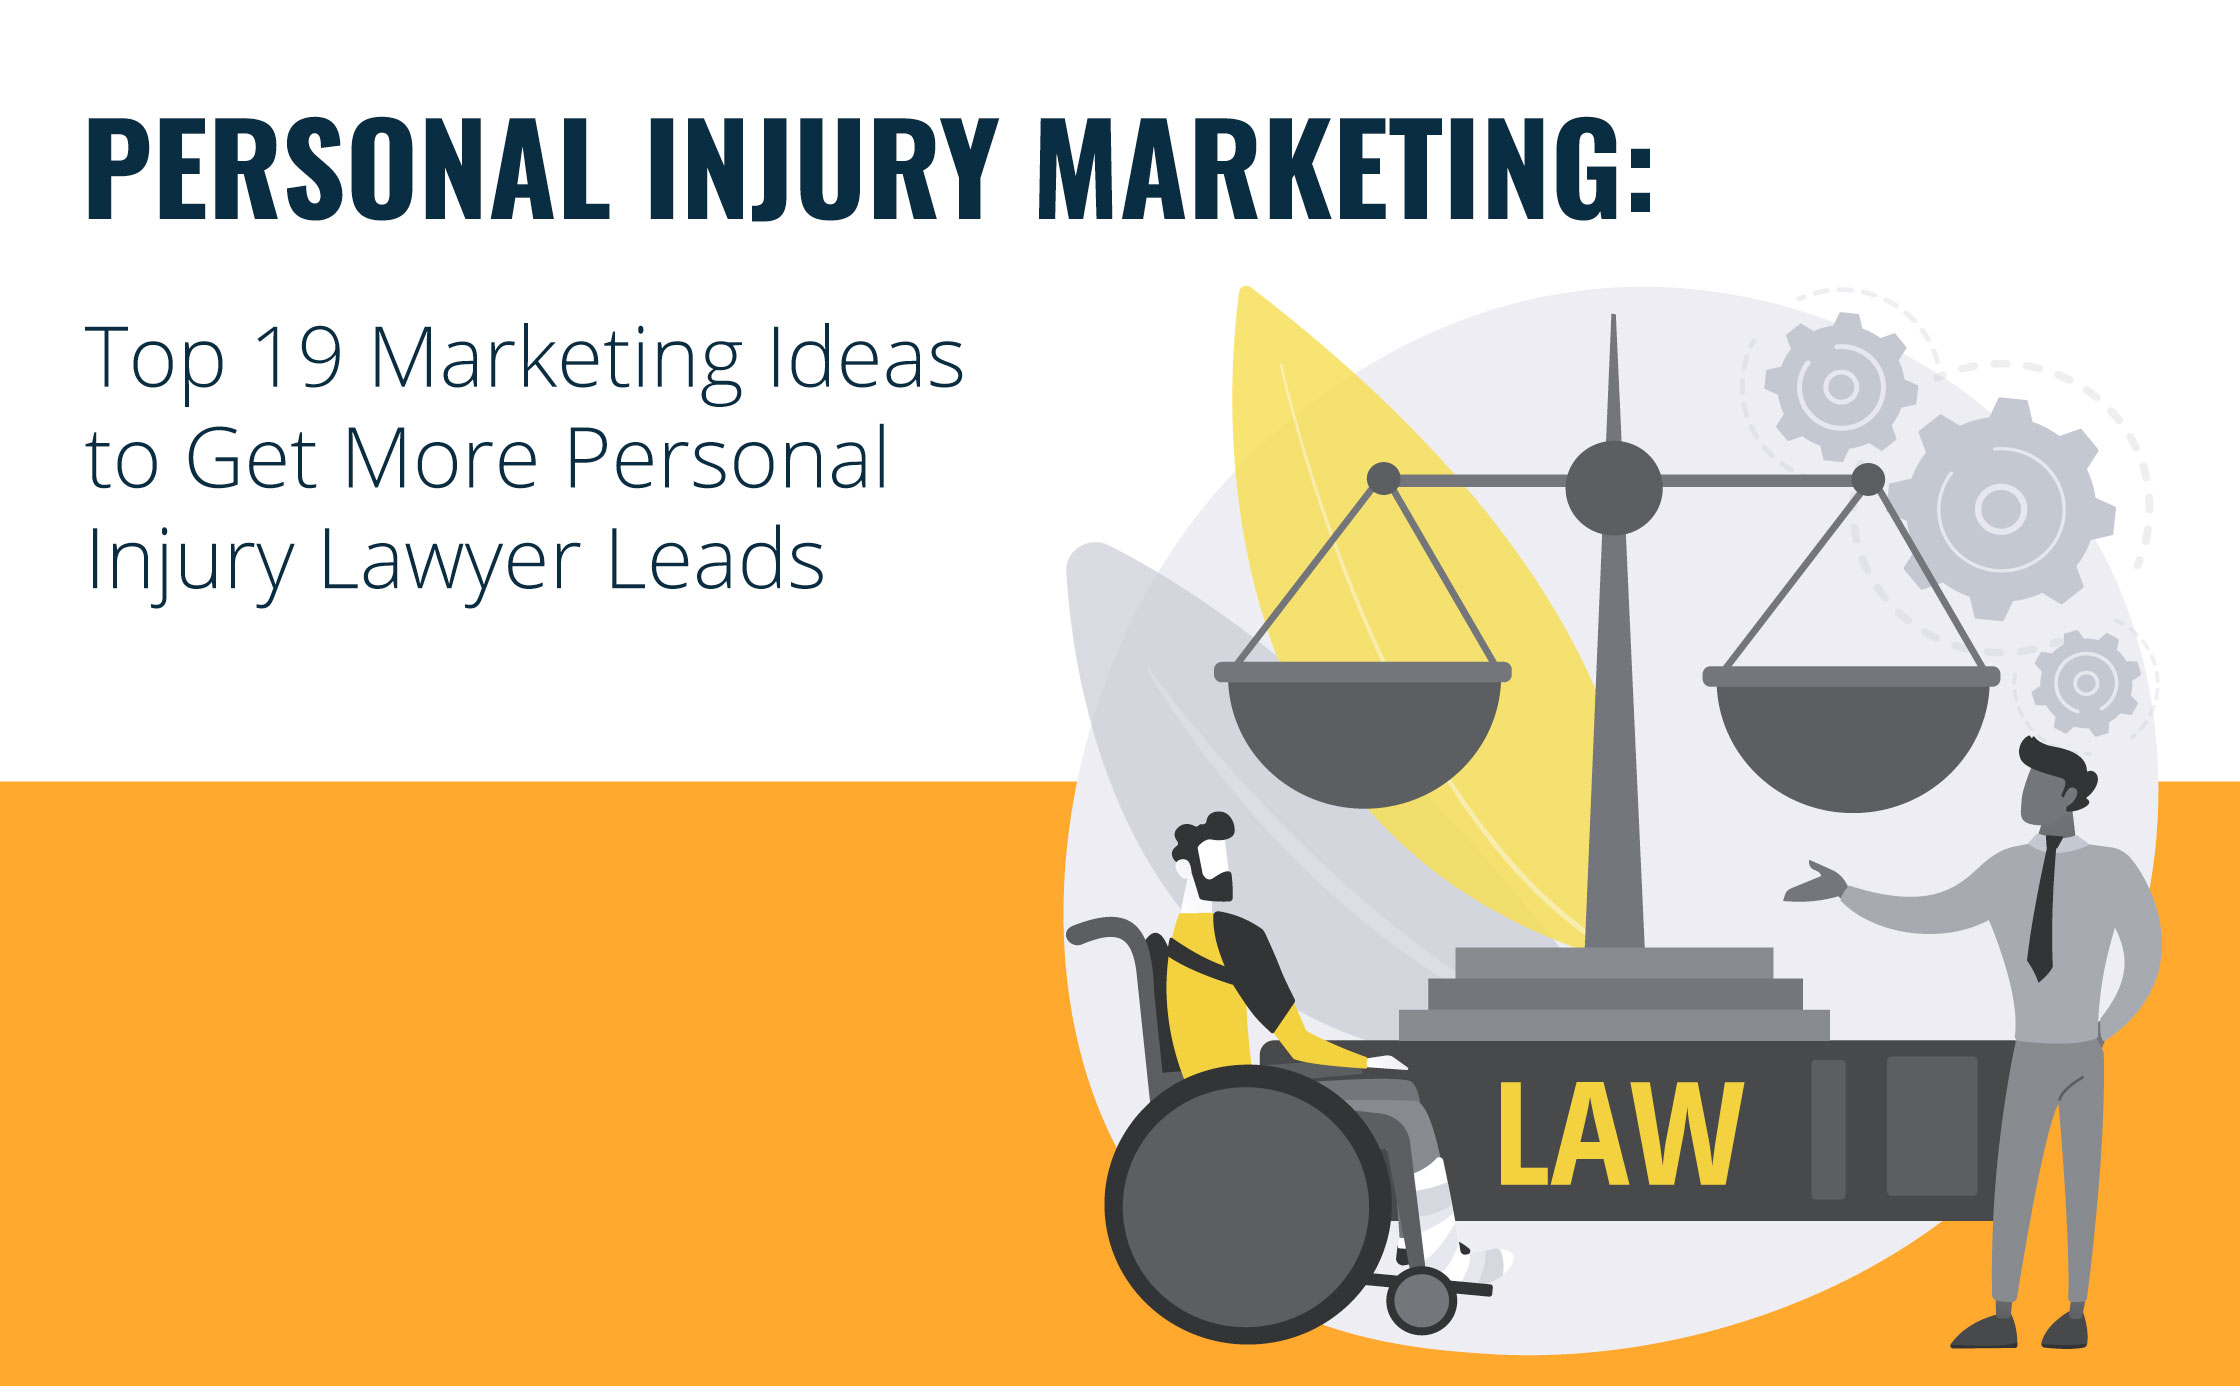 Personal Injury Marketing: Top 19 Marketing Ideas to Get More Personal Injury Lawyer Leads